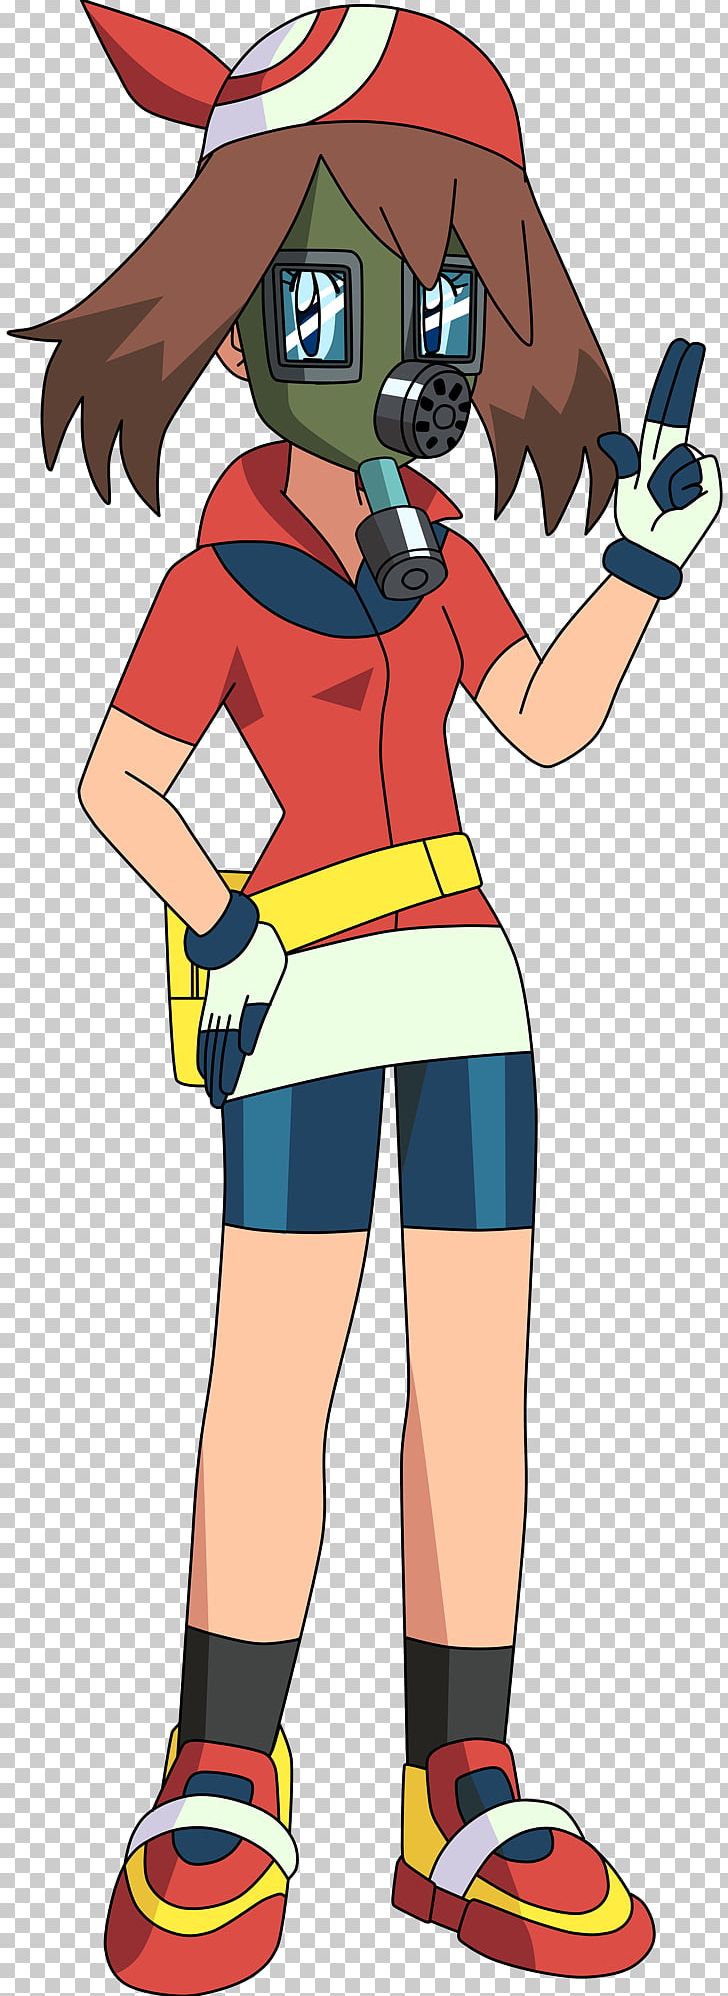 May Misty Dawn Pokémon Mask PNG, Clipart, Anime, Art, Artwork, Character, Clothing Free PNG Download